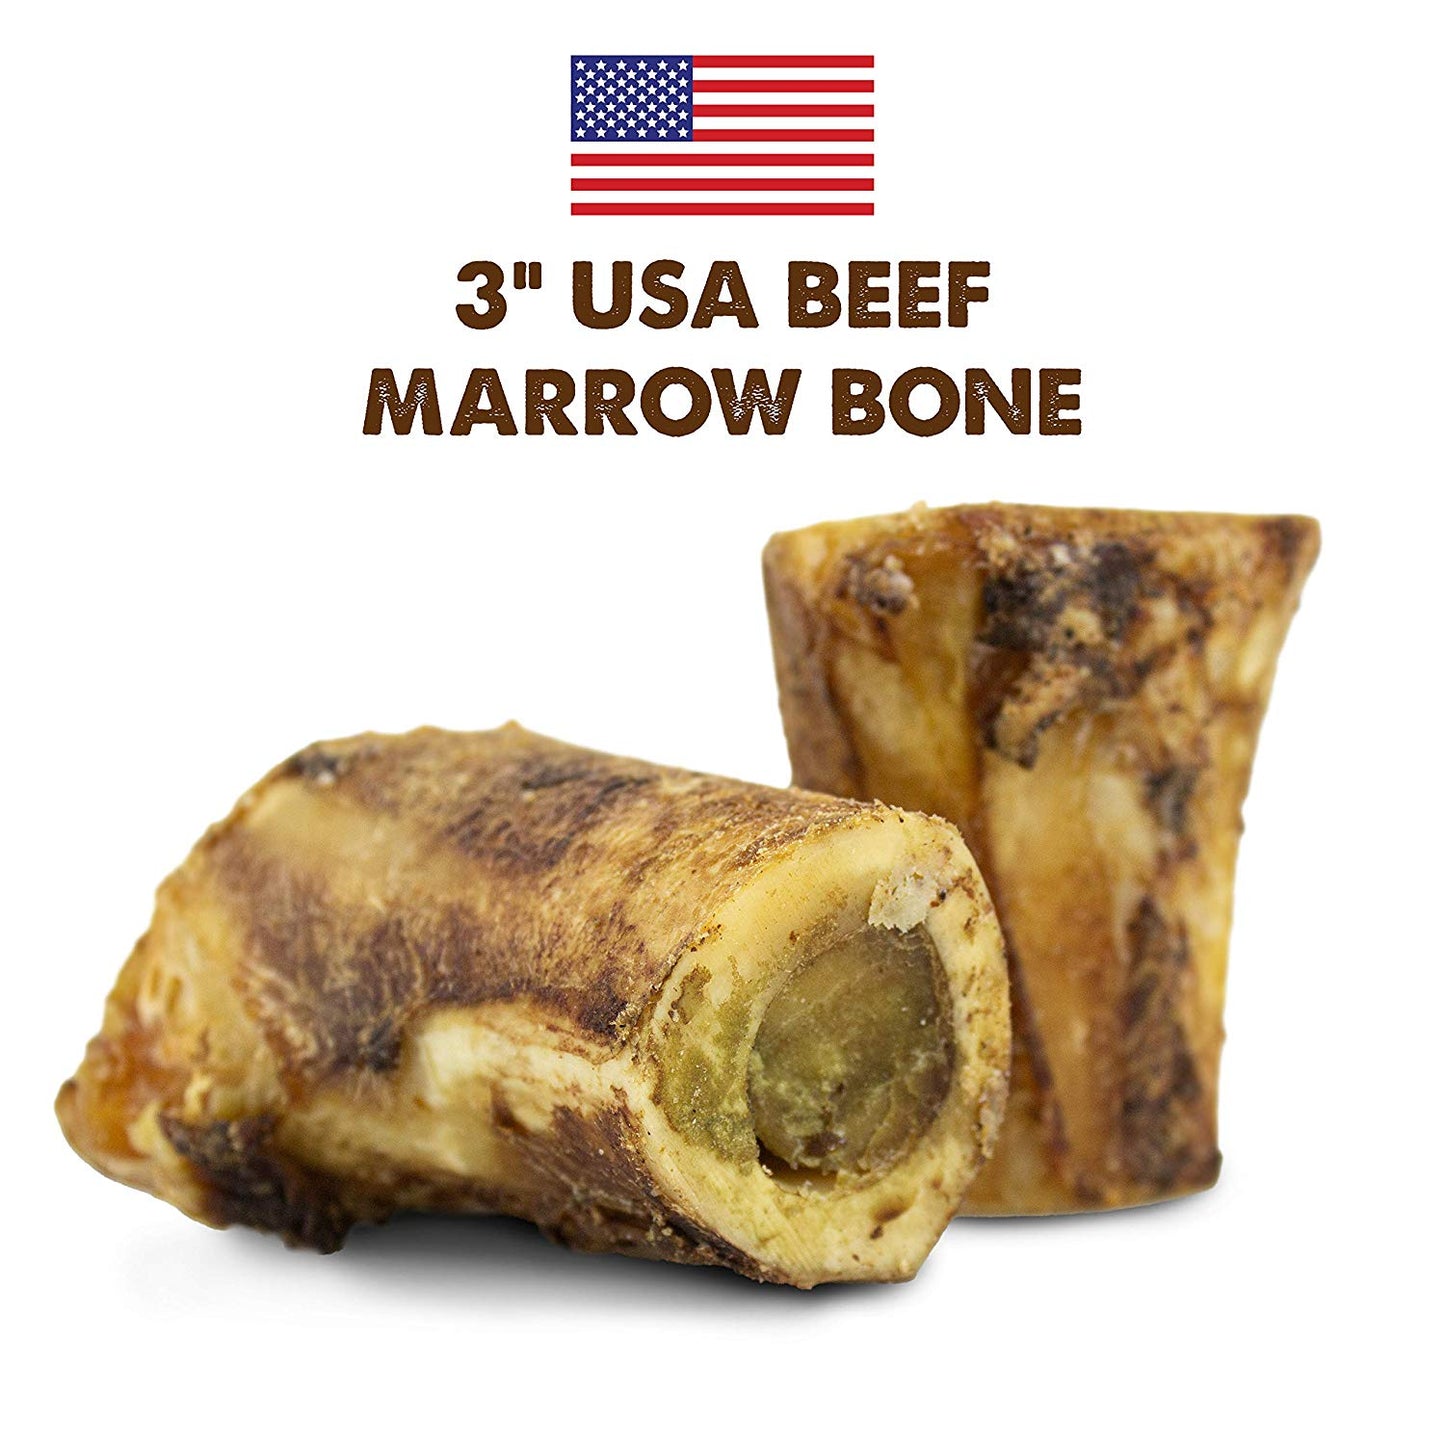 are smoked marrow bones safe for dogs